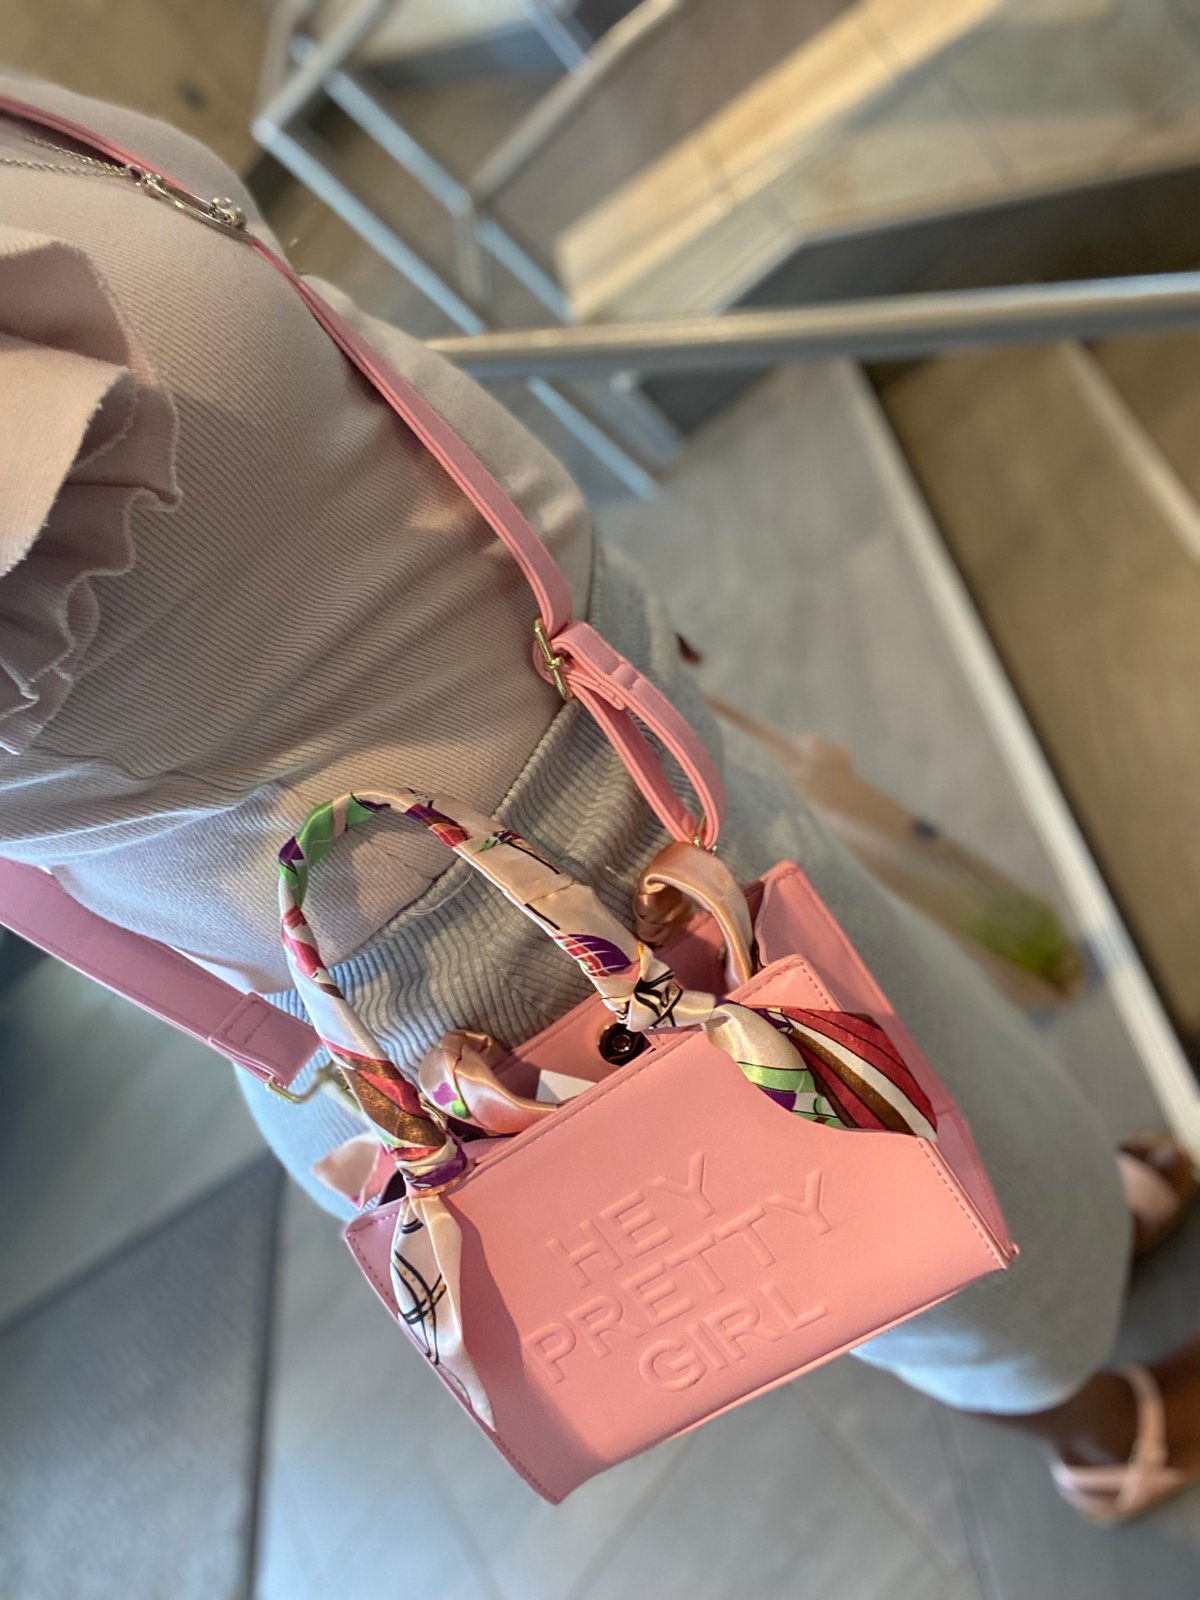 Shiny Pearl Shoulder Bag For Women, Kids, And Parties Small Wallet, Hand  Crossbody, Tote, Mini Purse, Bag From Backintimeshop1970, $10.44 |  DHgate.Com